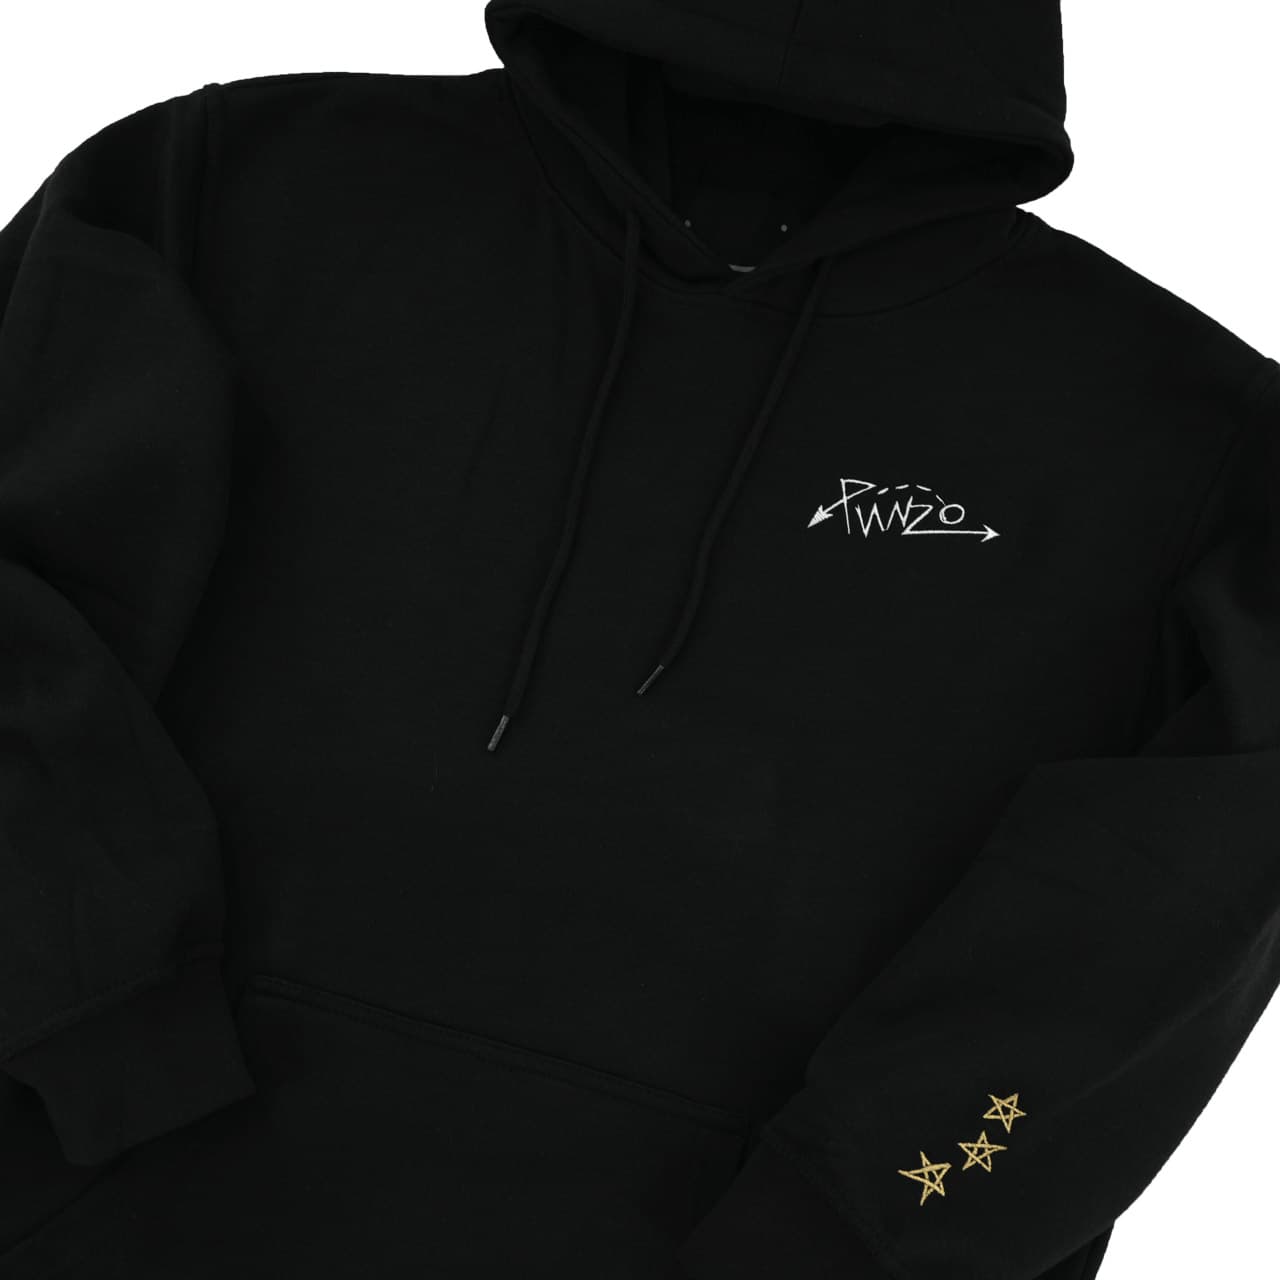 Punzo Graffiti Embroidered Pullover Hoodie